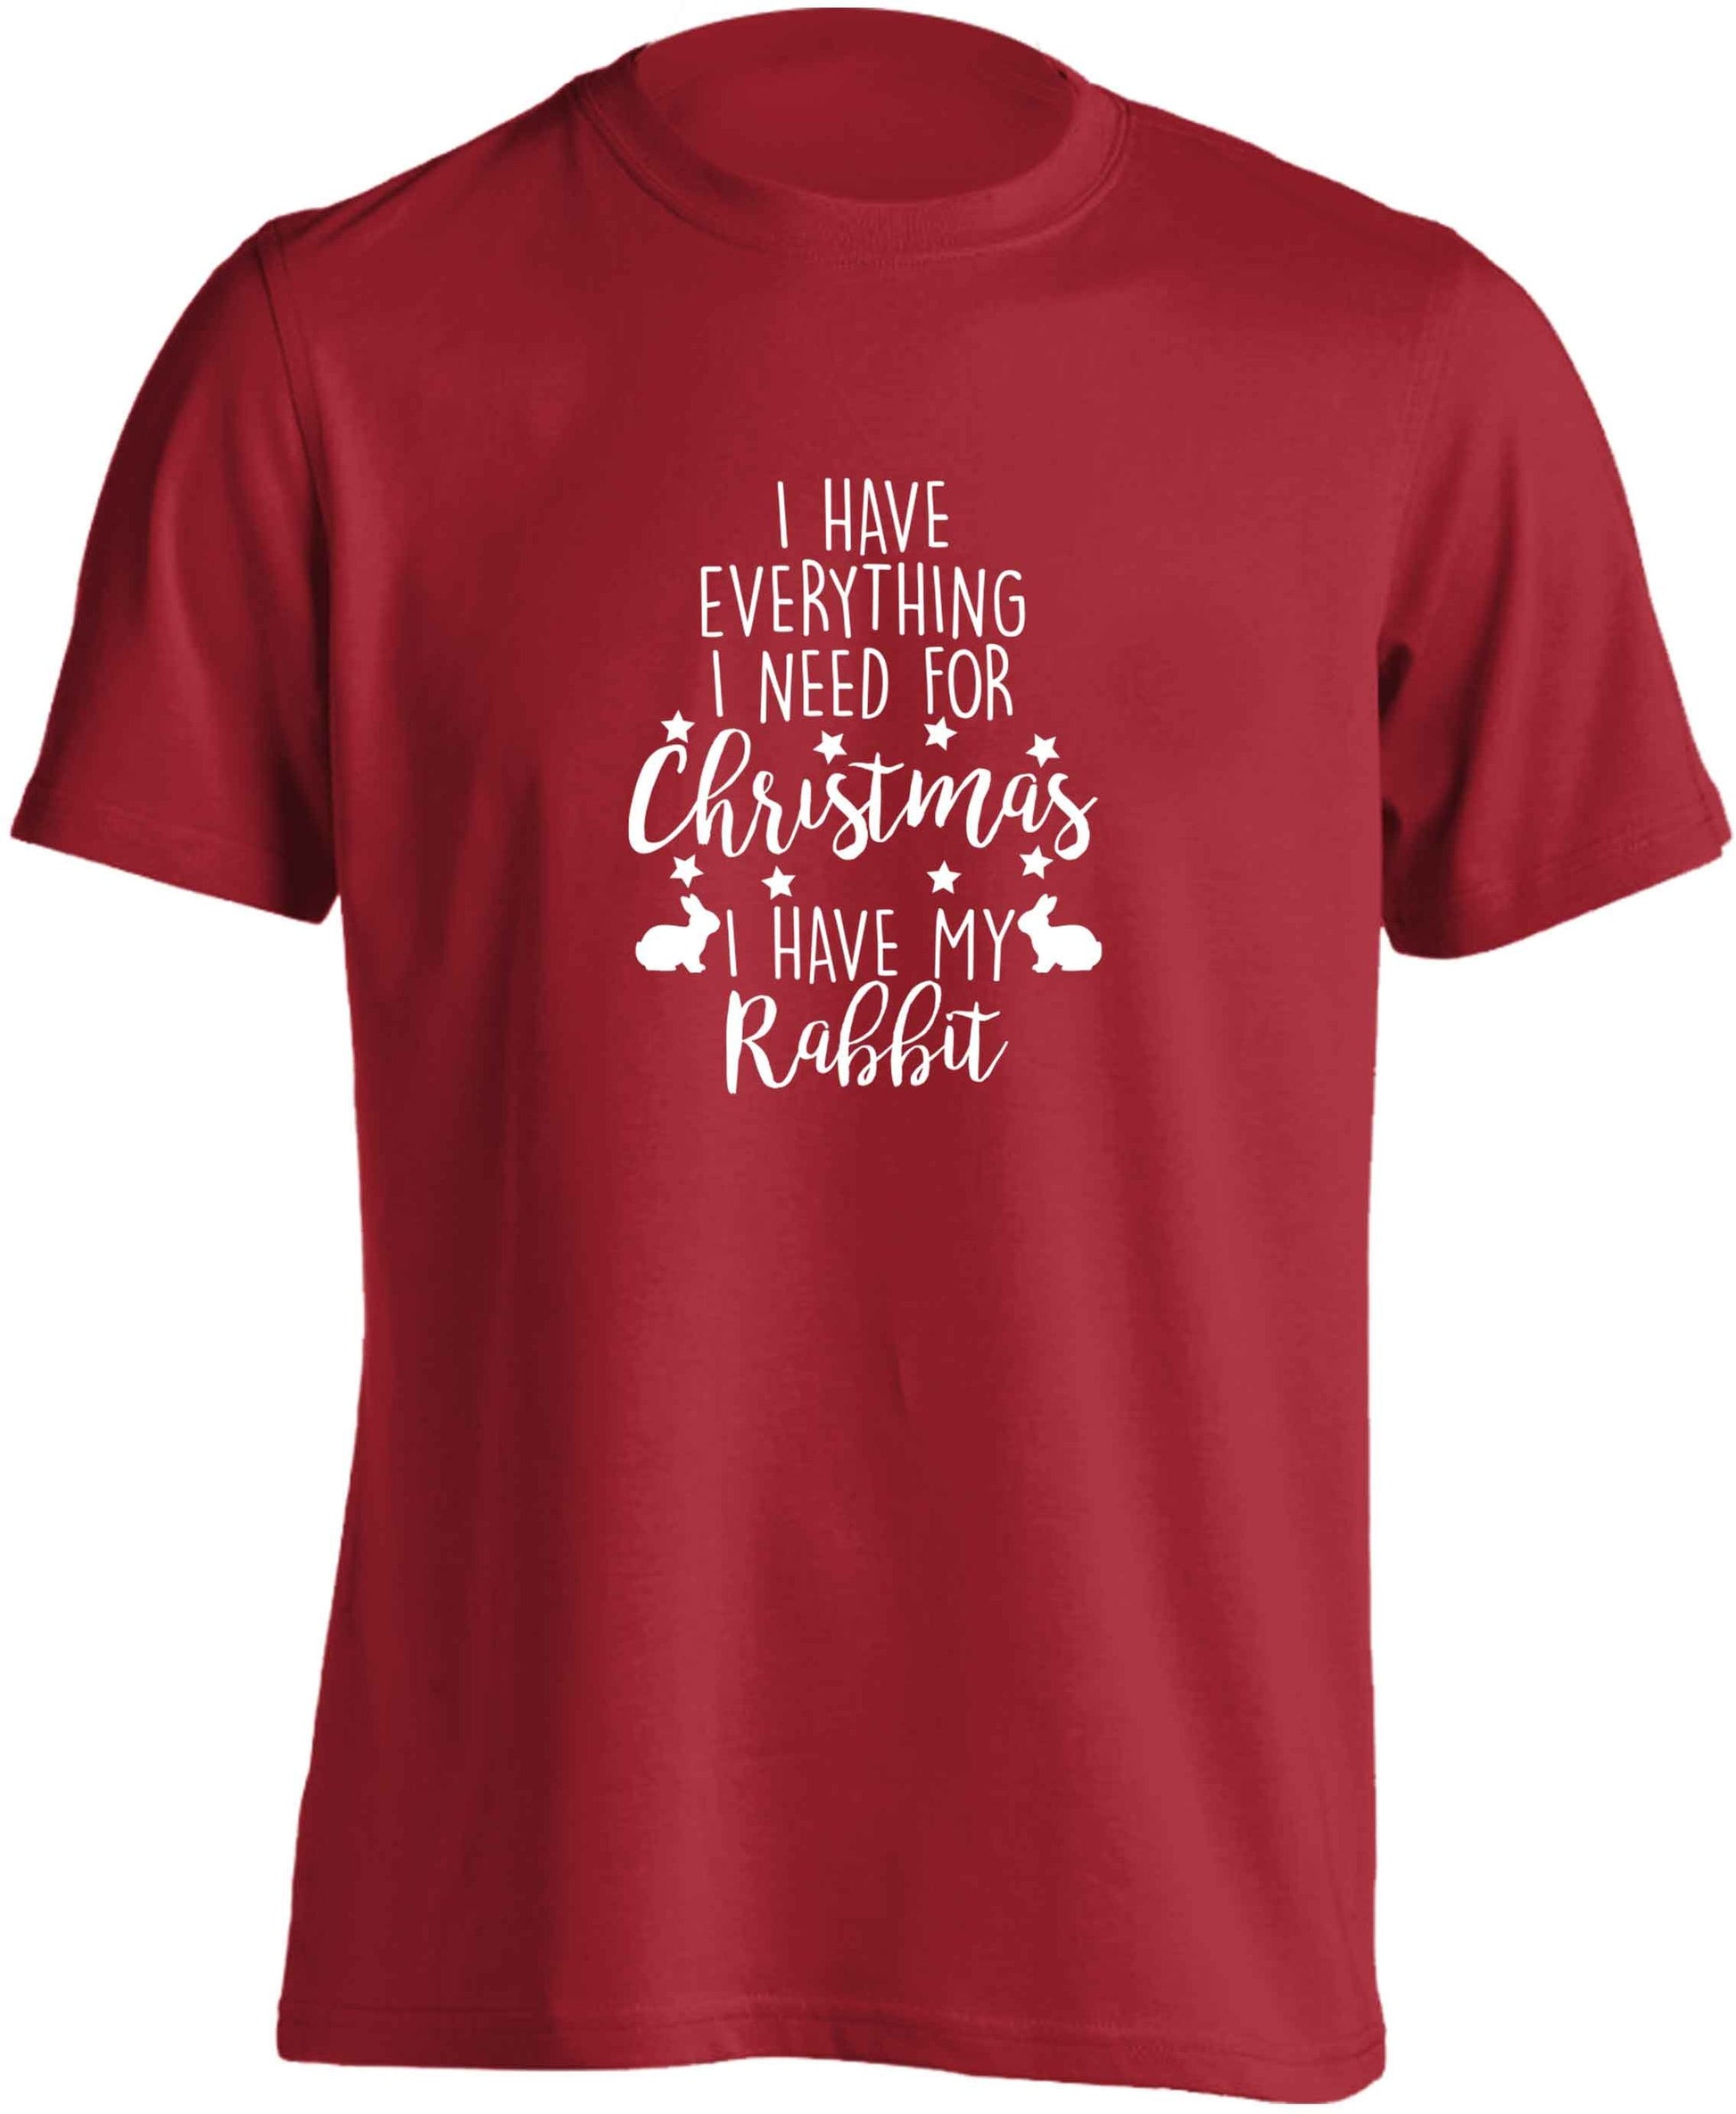 I have everything I need for Christmas I have my rabbit adults unisex red Tshirt 2XL